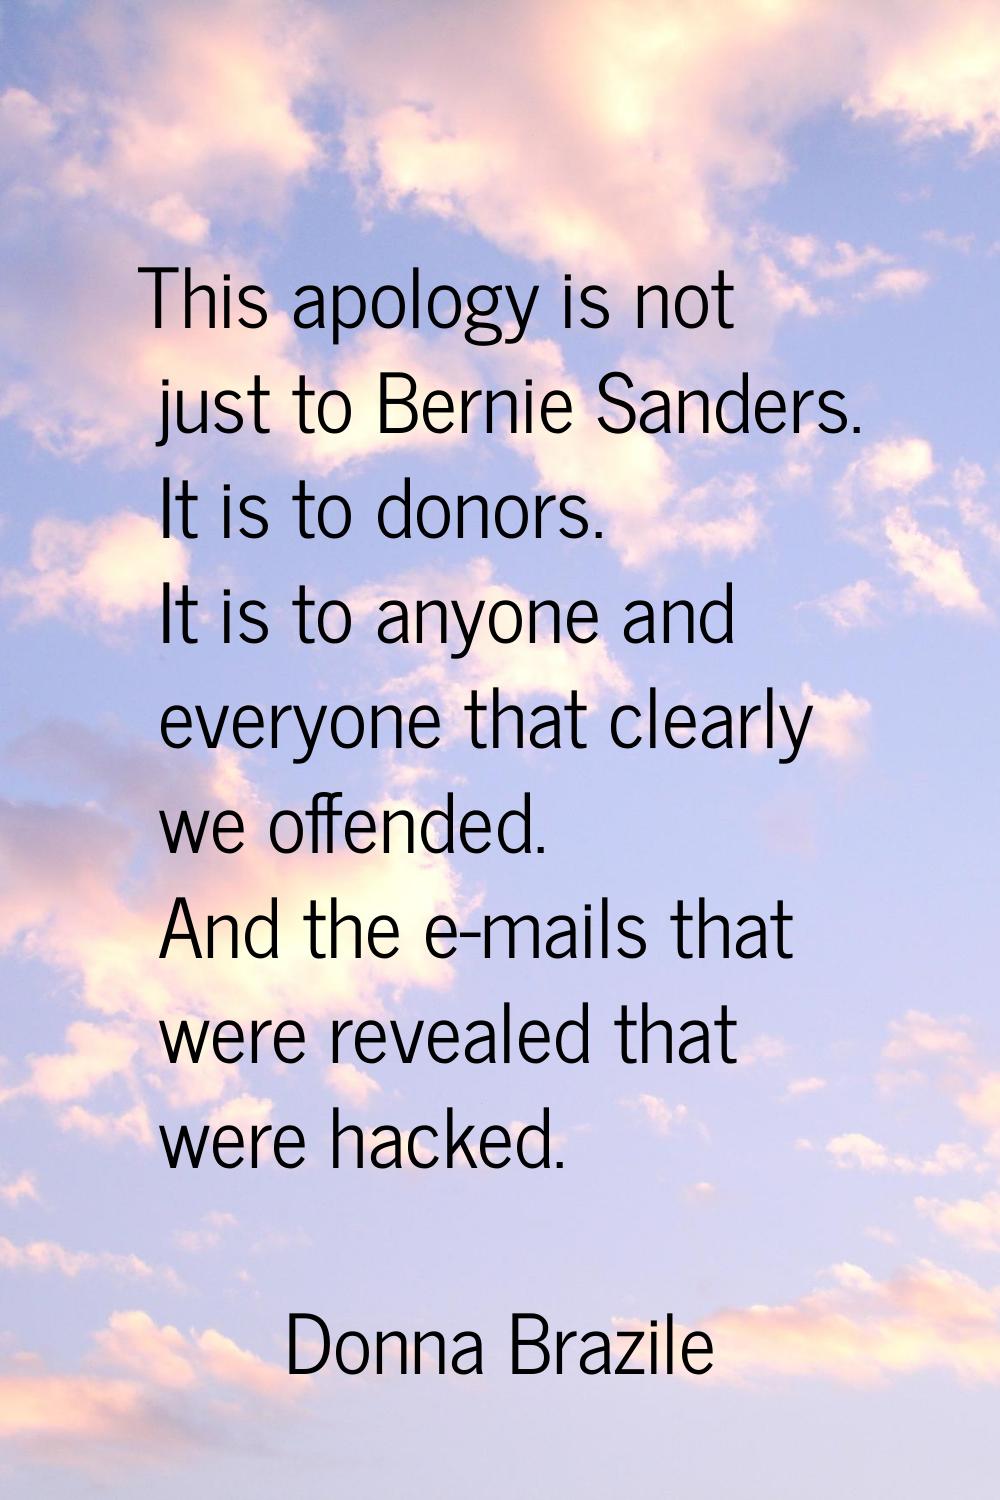 This apology is not just to Bernie Sanders. It is to donors. It is to anyone and everyone that clea